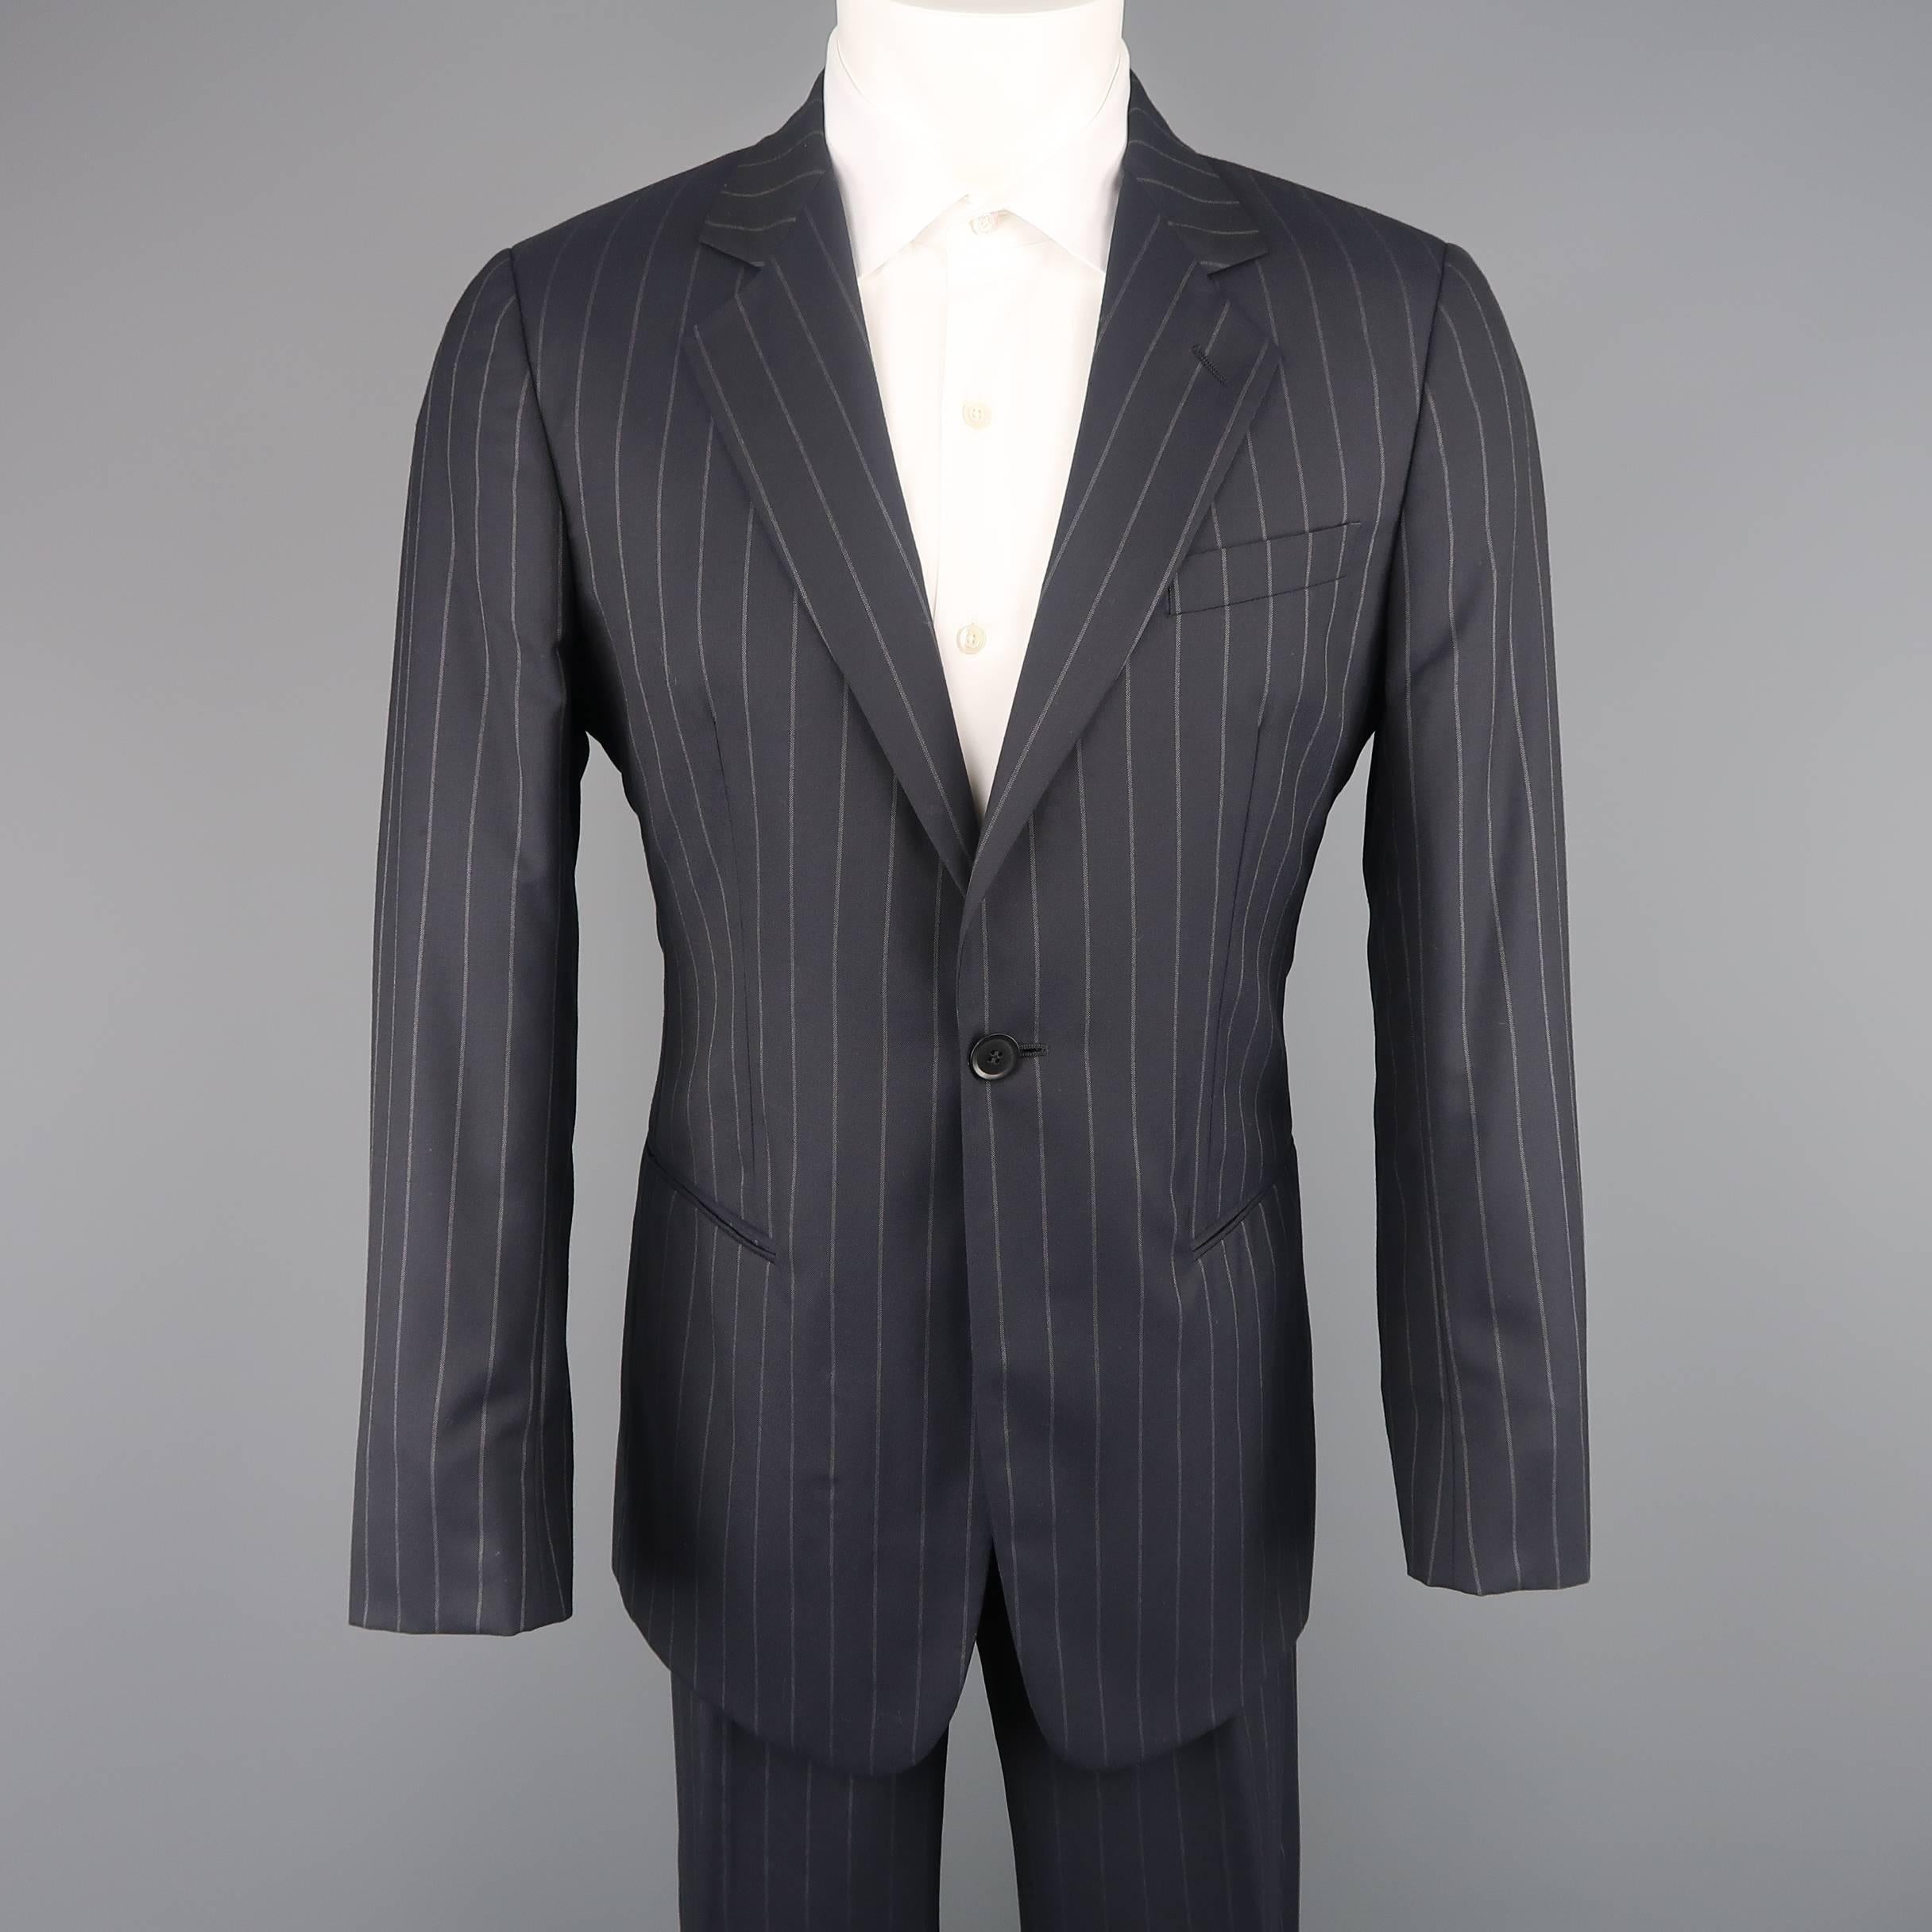 Two piece GIORGIO ARMANI suit comes in navy and grey chalk stripe wool and includes a single breasted, notch lapel sport coat with single button closure and matching straight leg dress pants. Made in Italy.
 
Good Pre-Owned Condition.
Marked: IT 50
